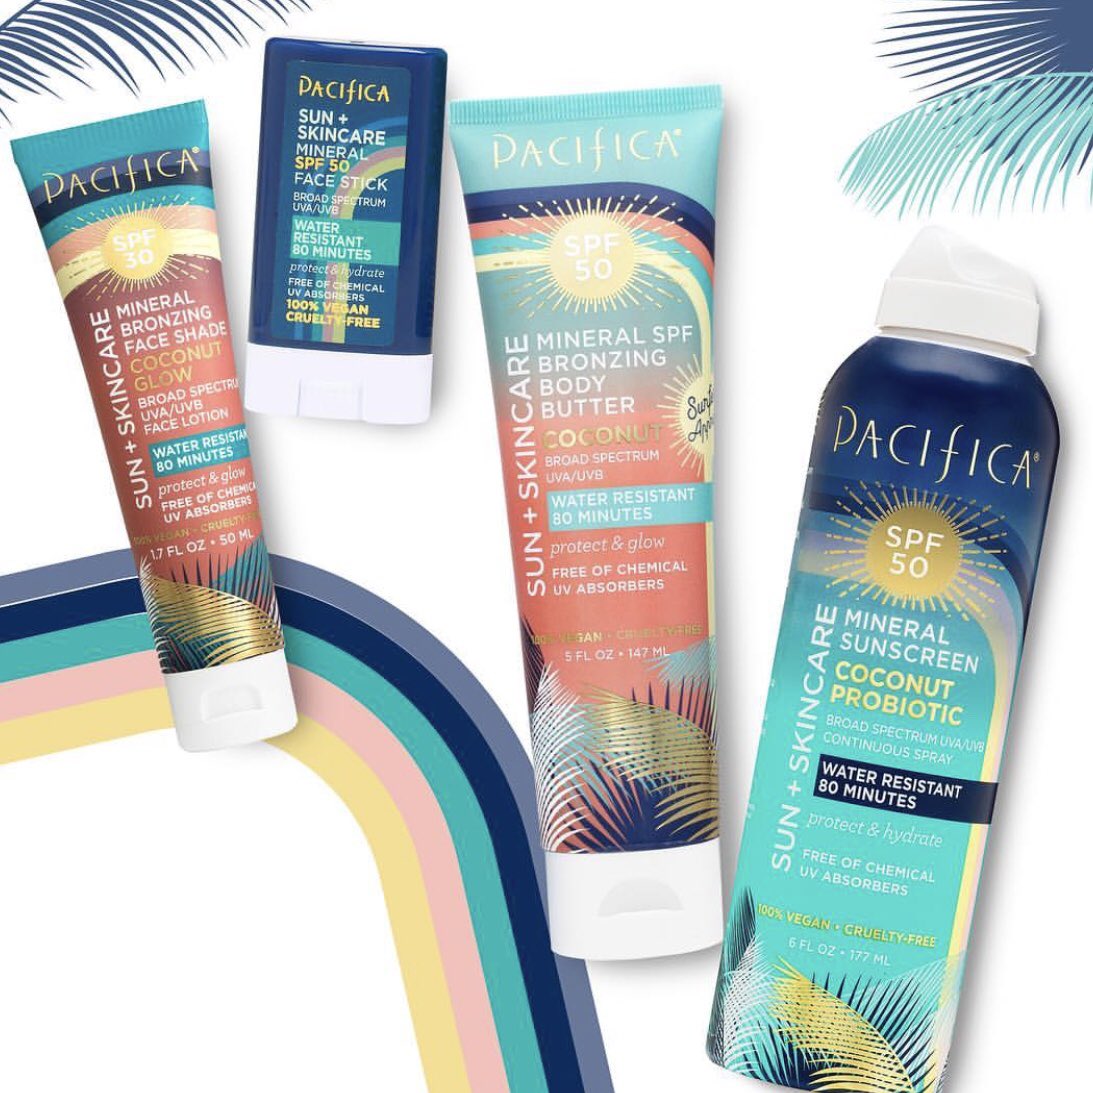 Starting off the weekend with #coconut #sunshine! ☀️Which one of these #suncare favorites will you pack with you this weekend?  We say, bring them all!  #vegan #crueltyfree #weekend #magic @target #target #pacificabeauty #mineralsunscreen